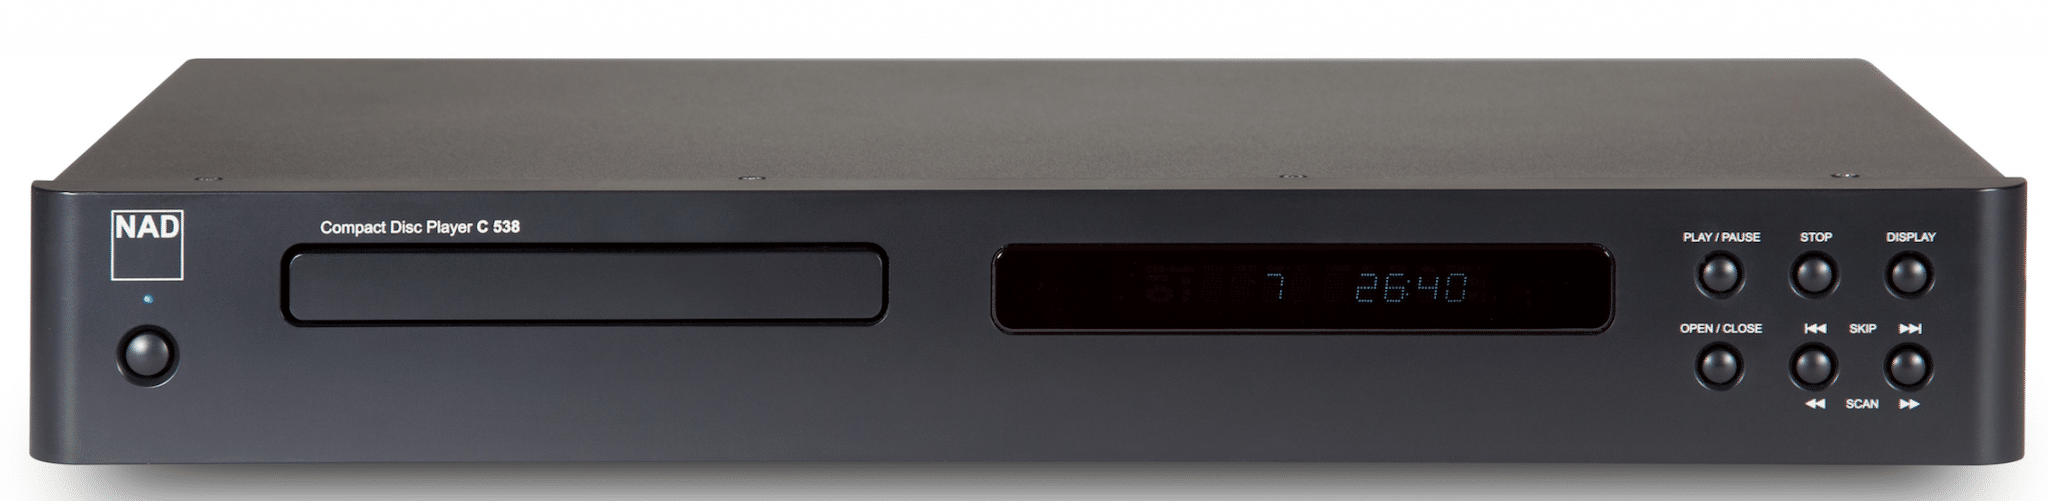 C 538 CD Player From NAD